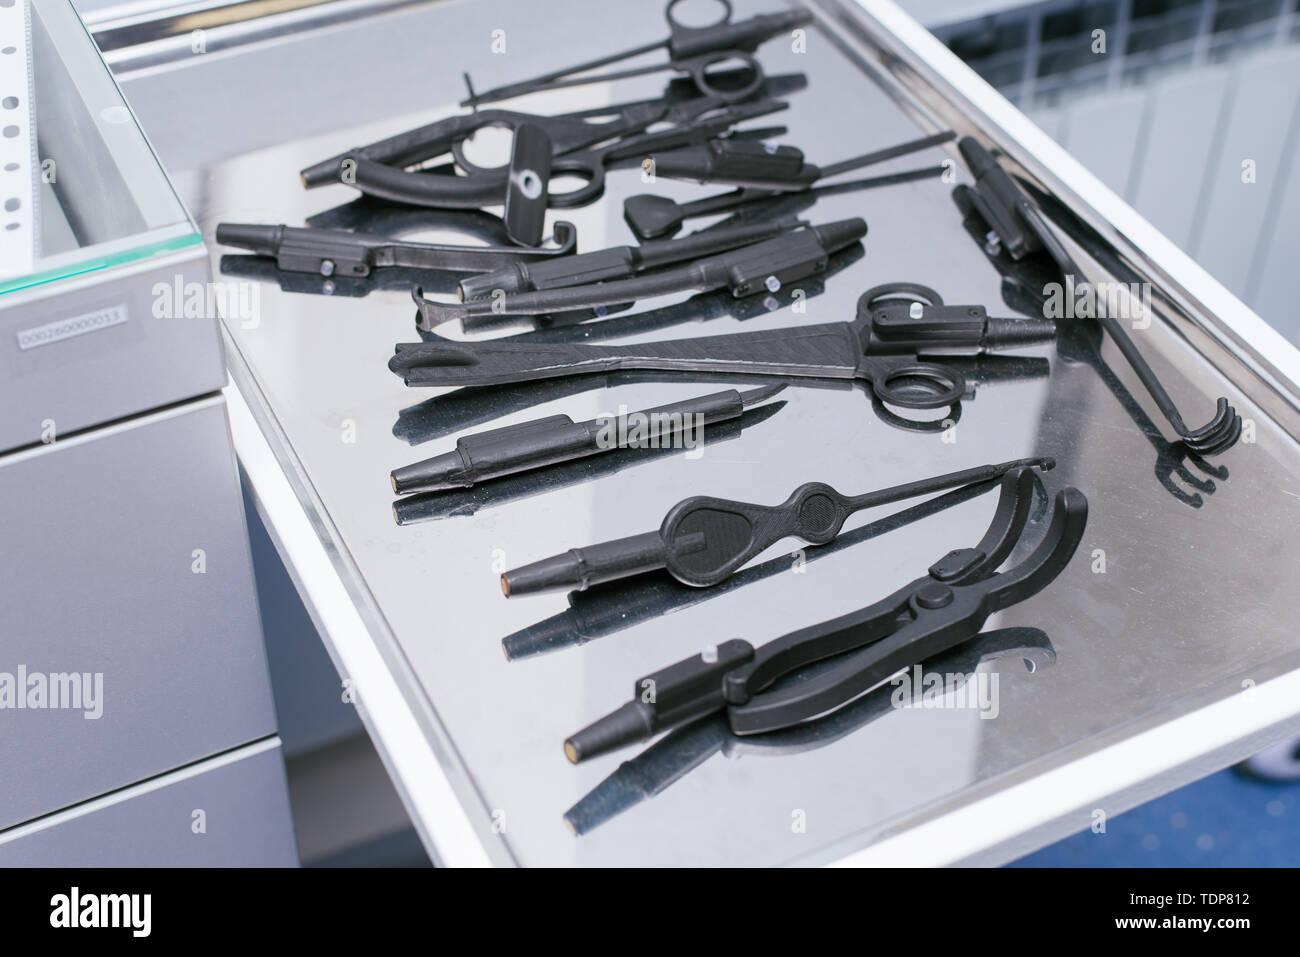 Unnatural medical instruments and accessories for virtual surgery. Plastic forceps, clamps, medical devices for 3D operations. Education of medical un Stock Photo